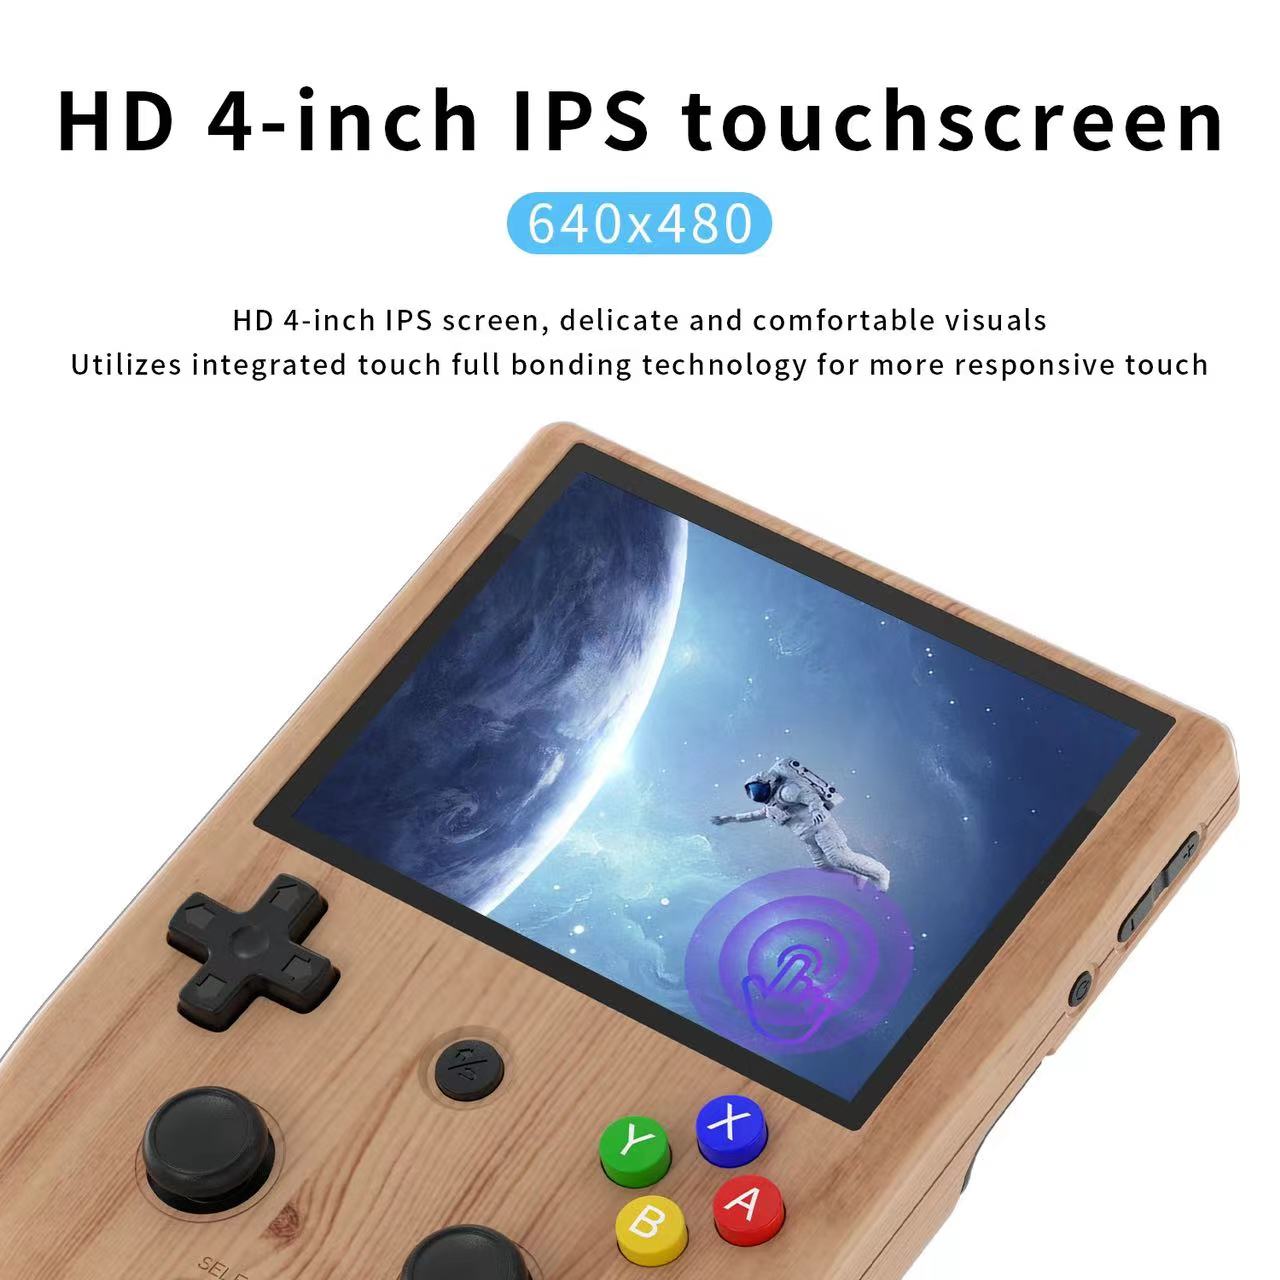 ANBERNIC RG405V vertical Android handheld portable TV 2024 new rocker arcade handheld game console handle streaming screen.